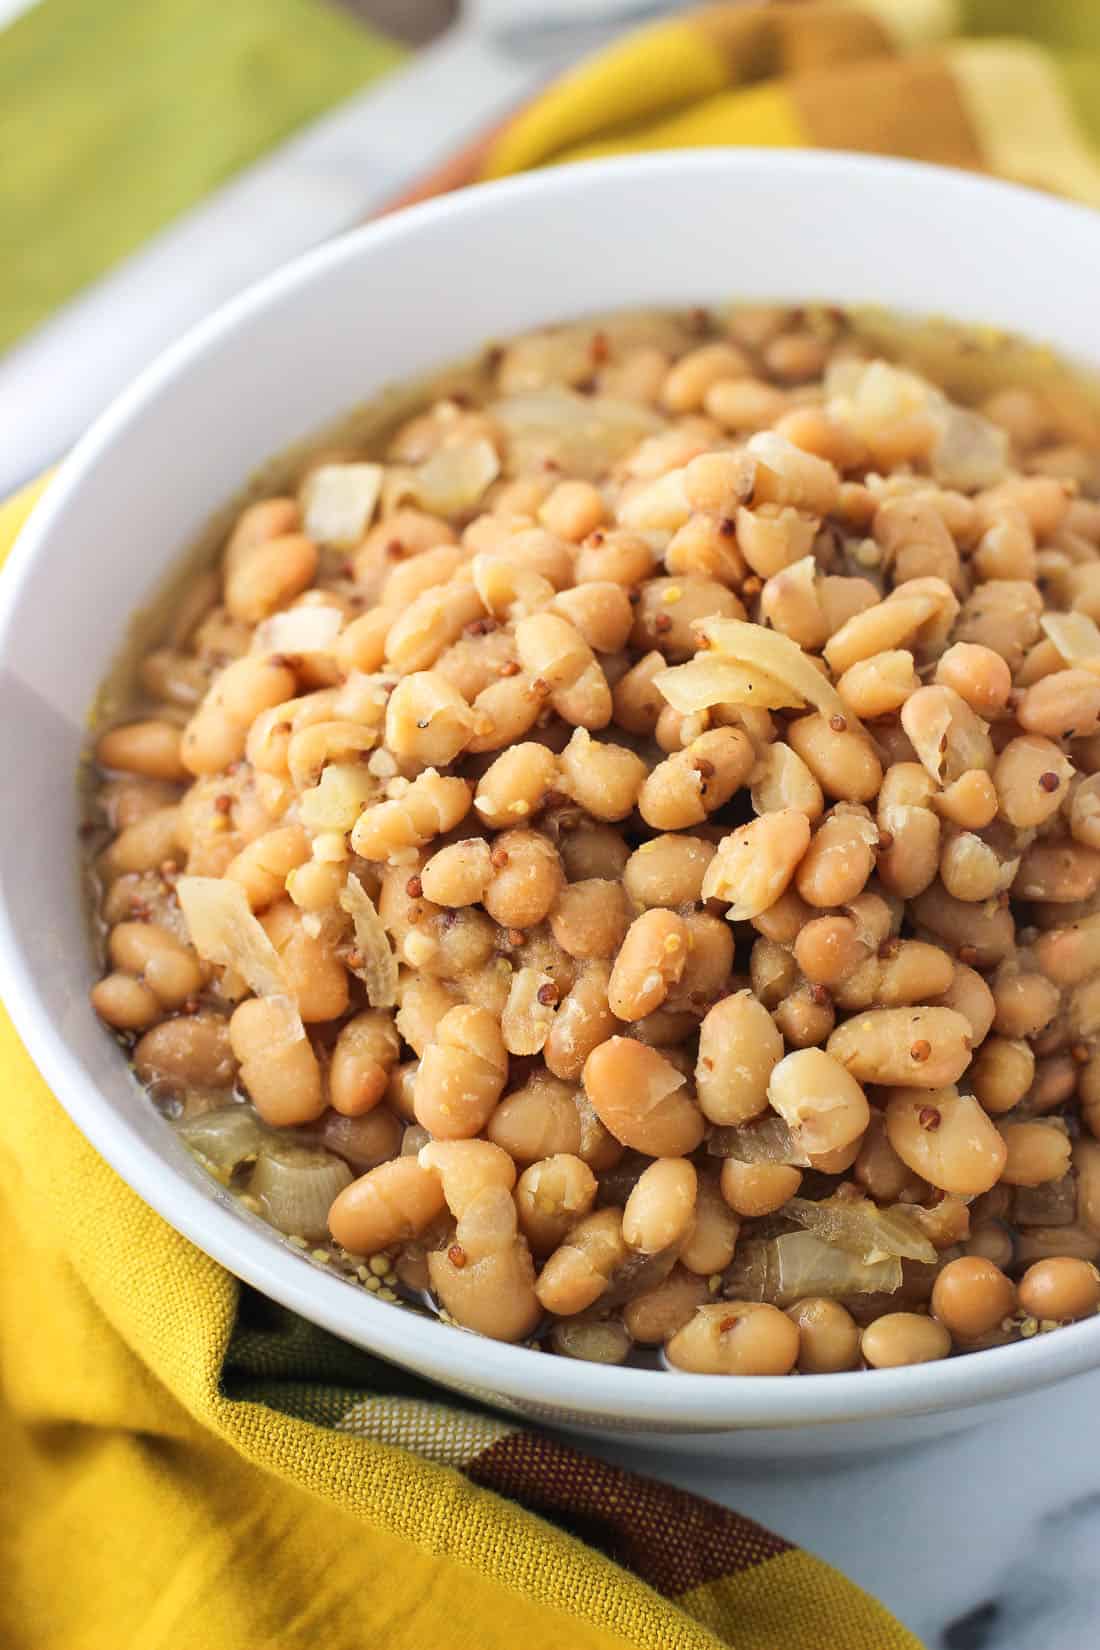 Cannellini beans in a mustard beer sauce in a ceramic bowl